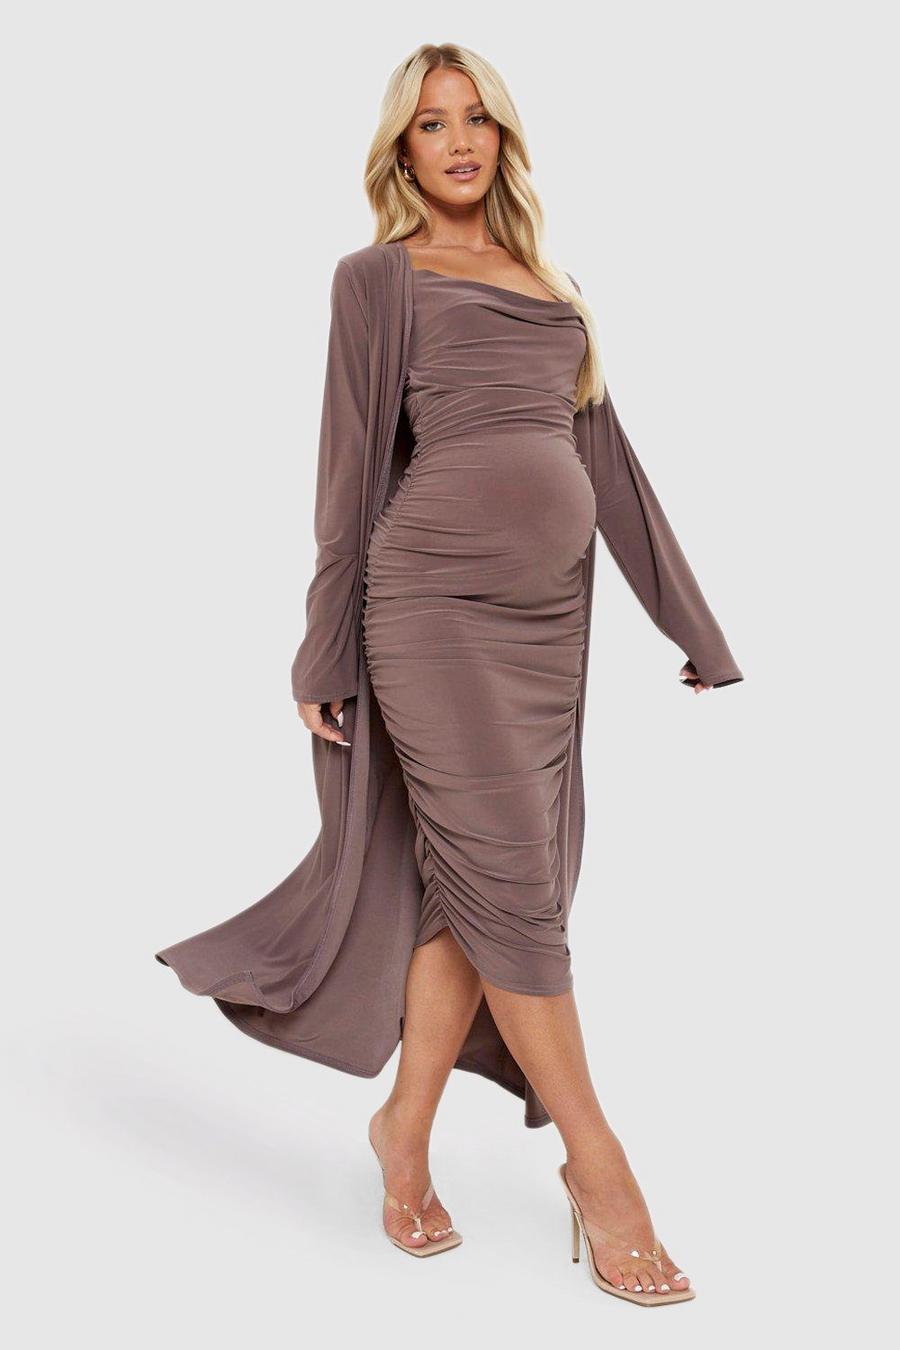 Mocha Maternity Strappy Cowl Neck Dress And Duster Coat